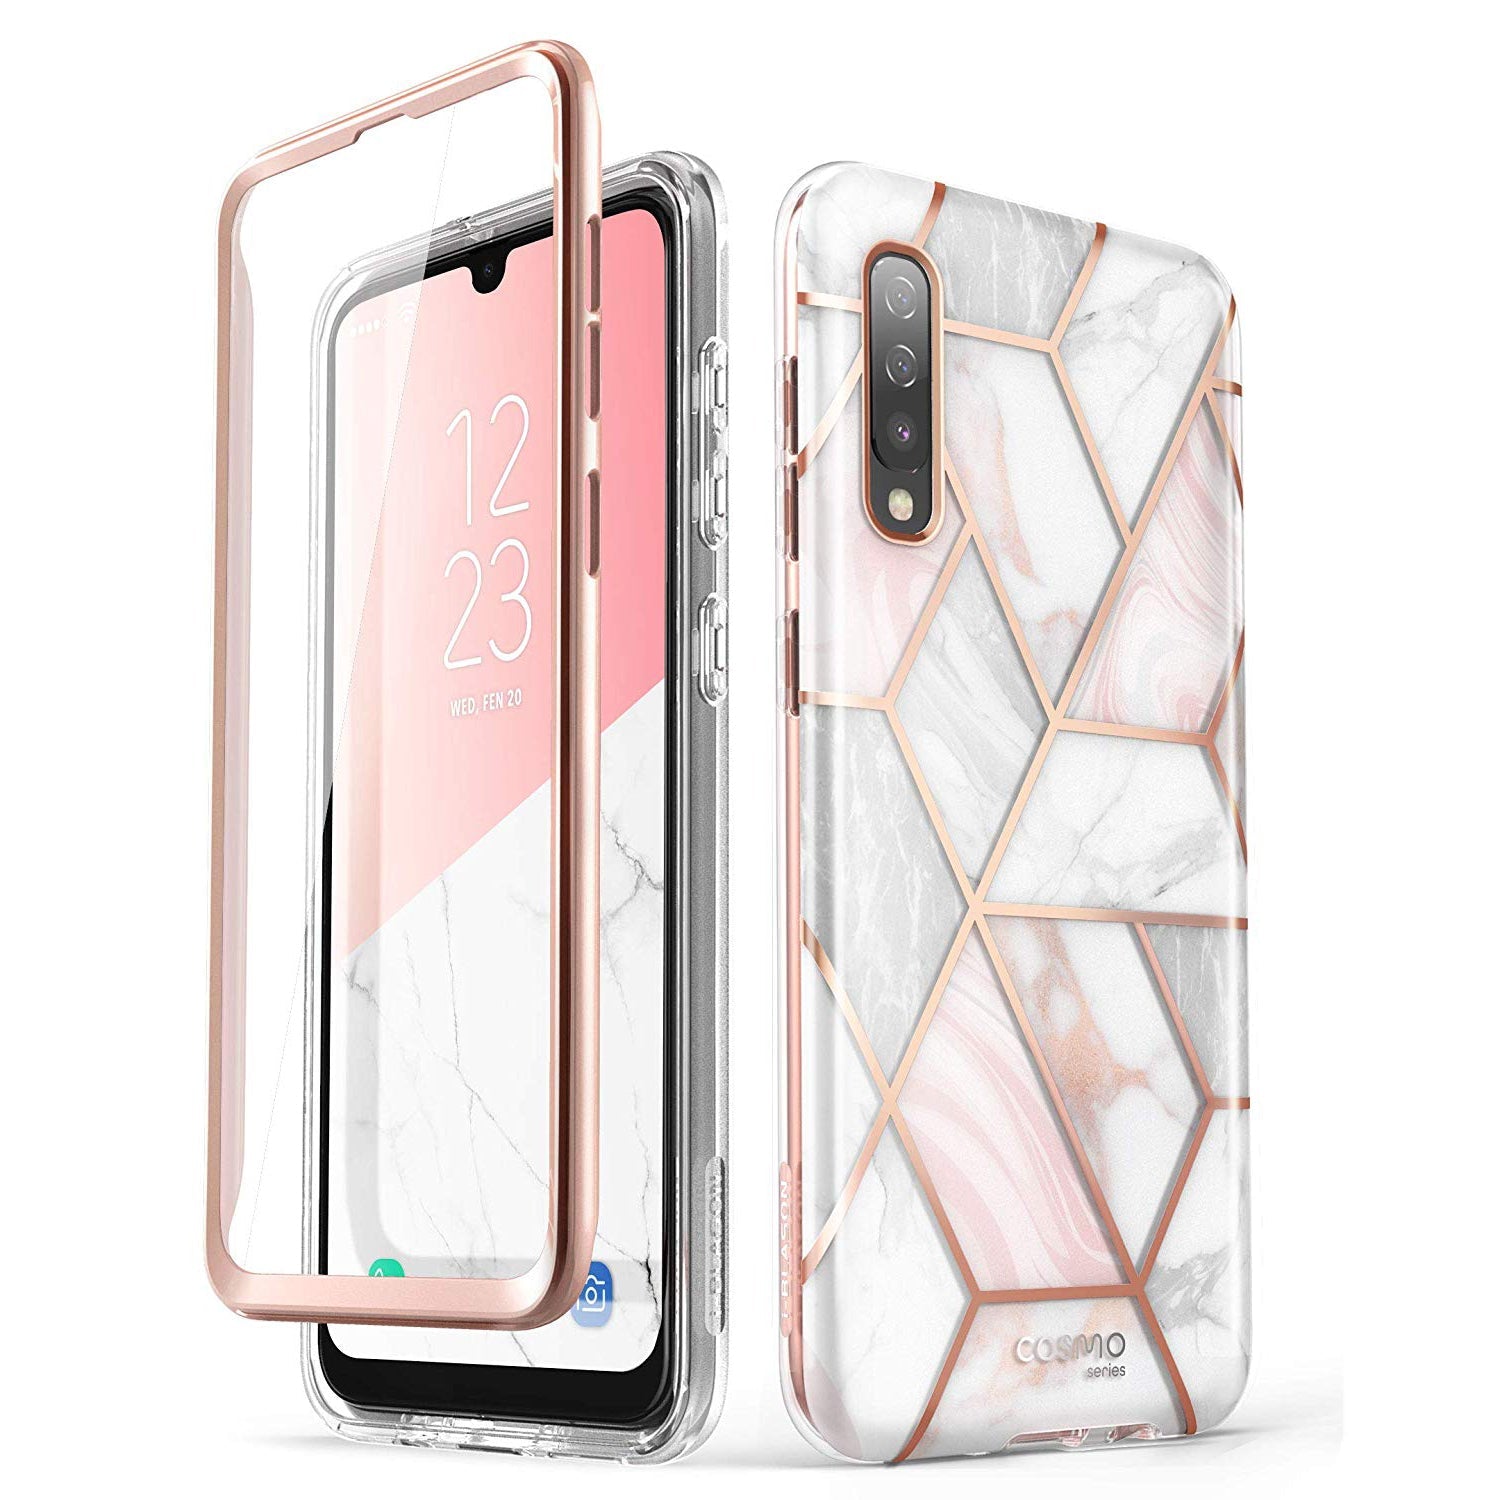 i-Blason Cosmo Series for Samsung Galaxy A50/A50s Case, Slim Full-Body Stylish Protective Case with Built-in Screen Protector (Marble)